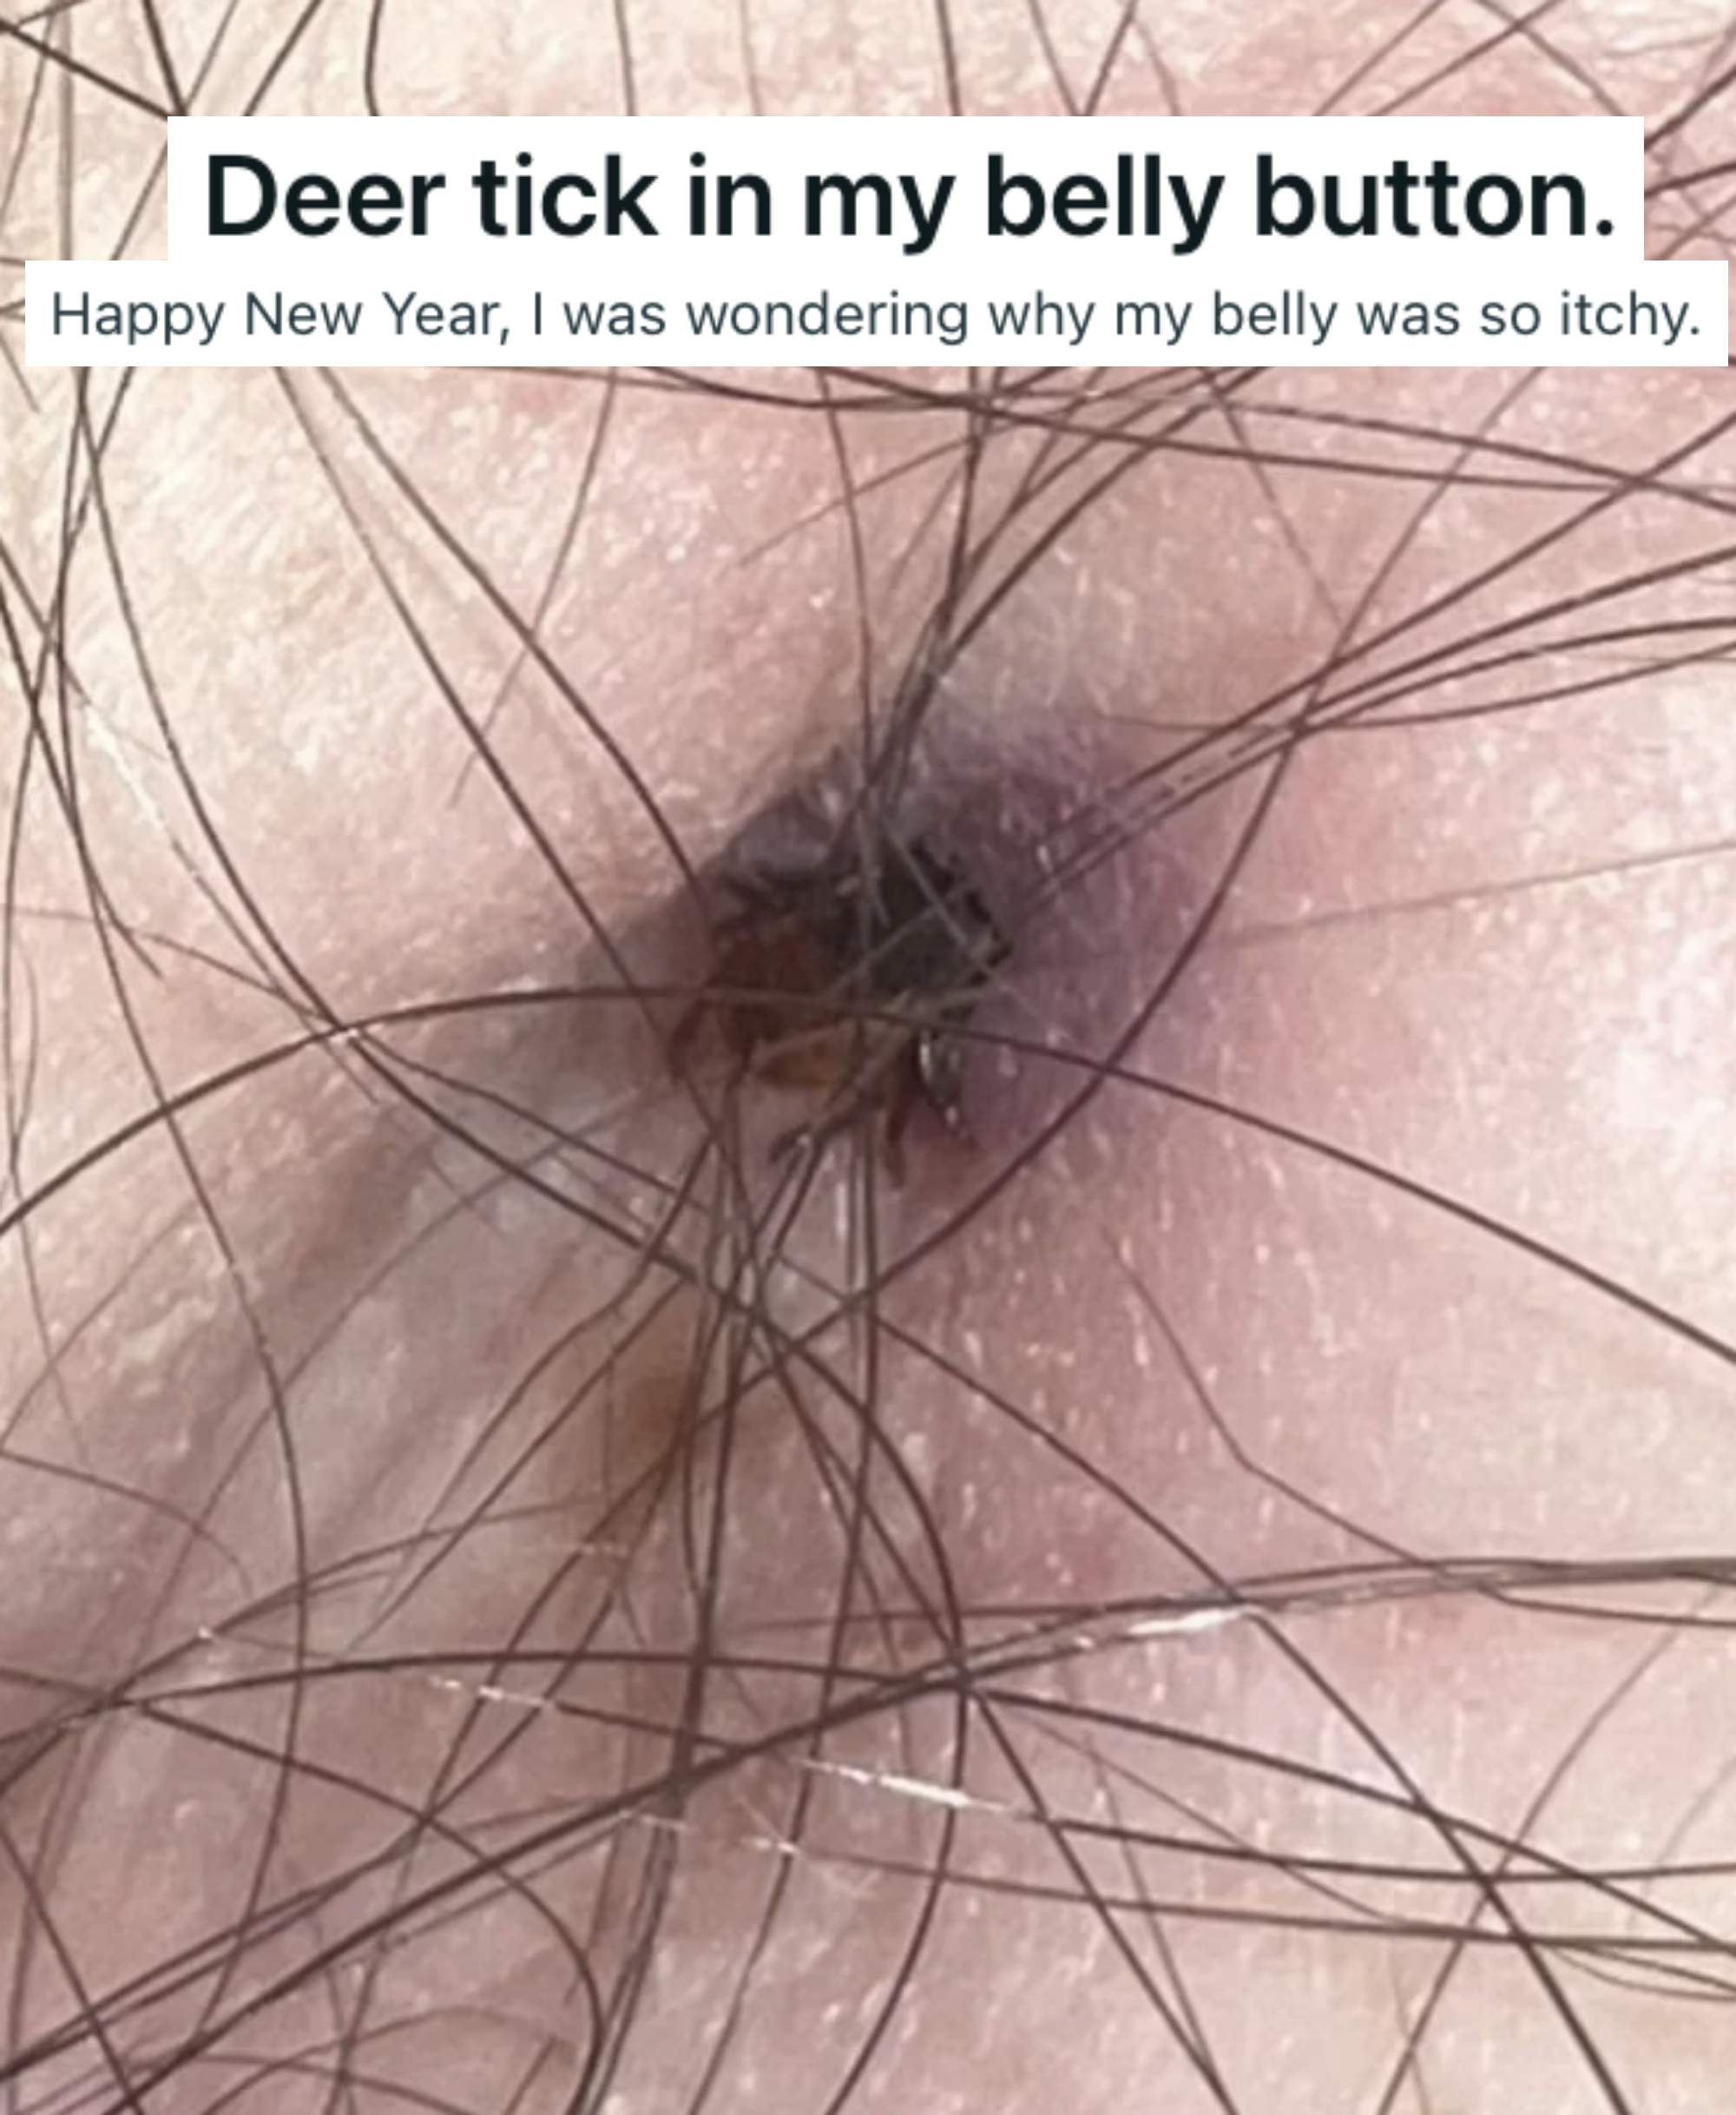 &quot;Deer tick in my belly button&quot;